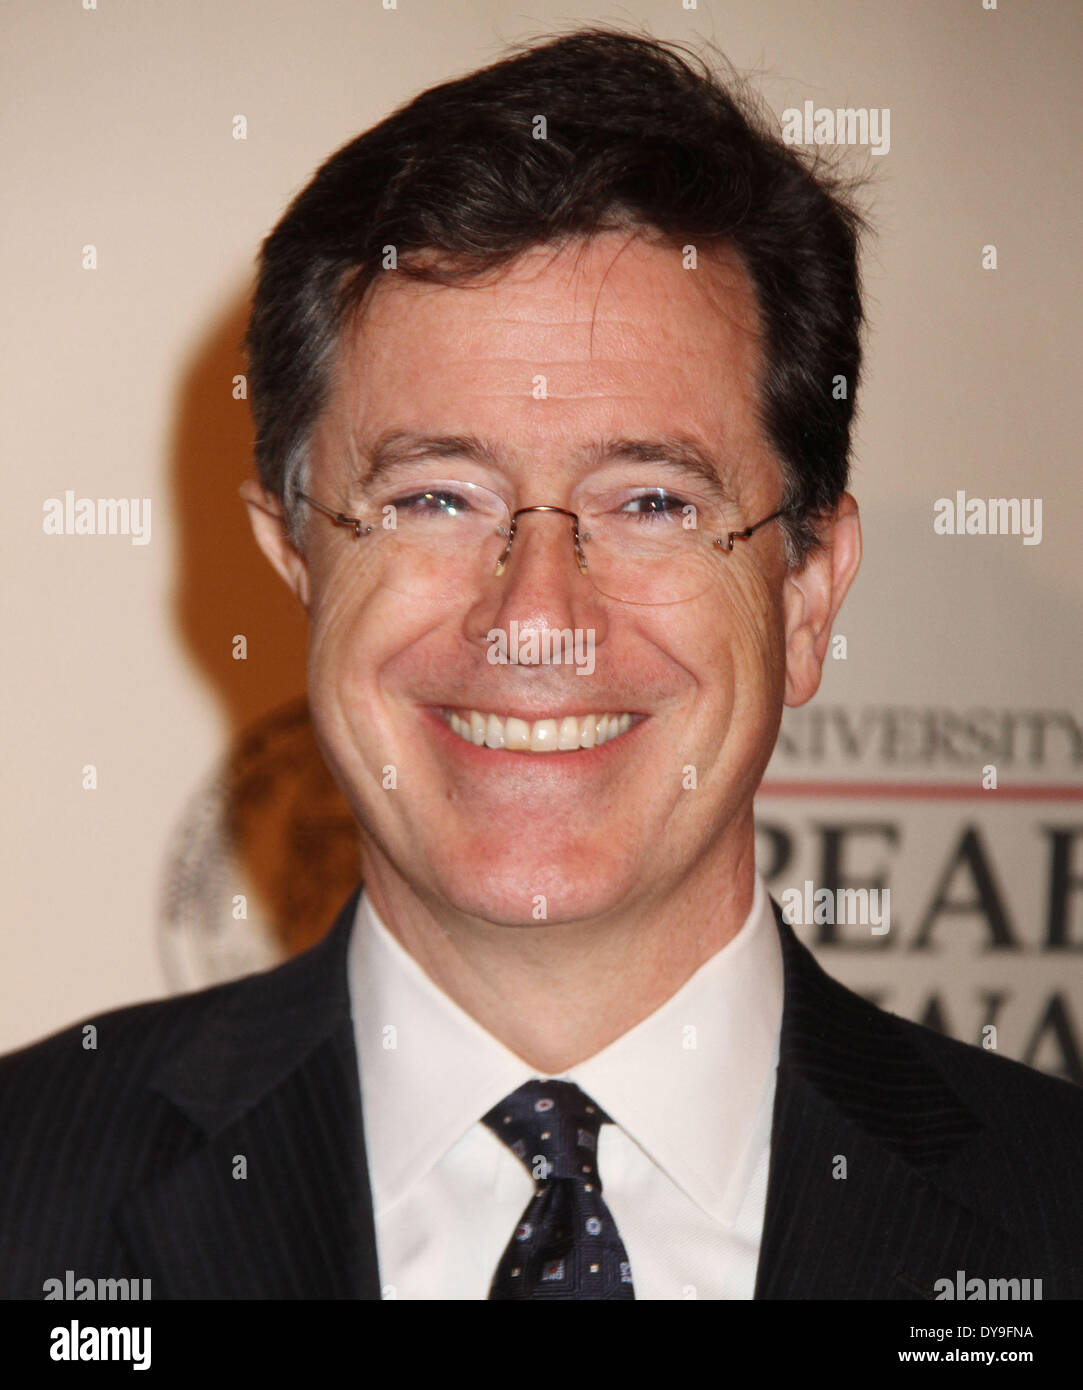 April 10, 2014 - CBS network announced the replacement for outgoing 'Late Show' host D. Letterman. STEPHEN COLBERT, whose satirical 'The Colbert Report' on Comedy Central competes in the same time slot, has landed the sought-after gig. PICTURED: May 21, 2012 - New York, New York, U.S. - Stephen Colbert attends the 71st Annual Peabody Awards held at Waldorf Astoria Hotel. (Credit Image: © Nancy Kaszerman/ZUMA Wire/ZUMAPRESS.com) Stock Photo